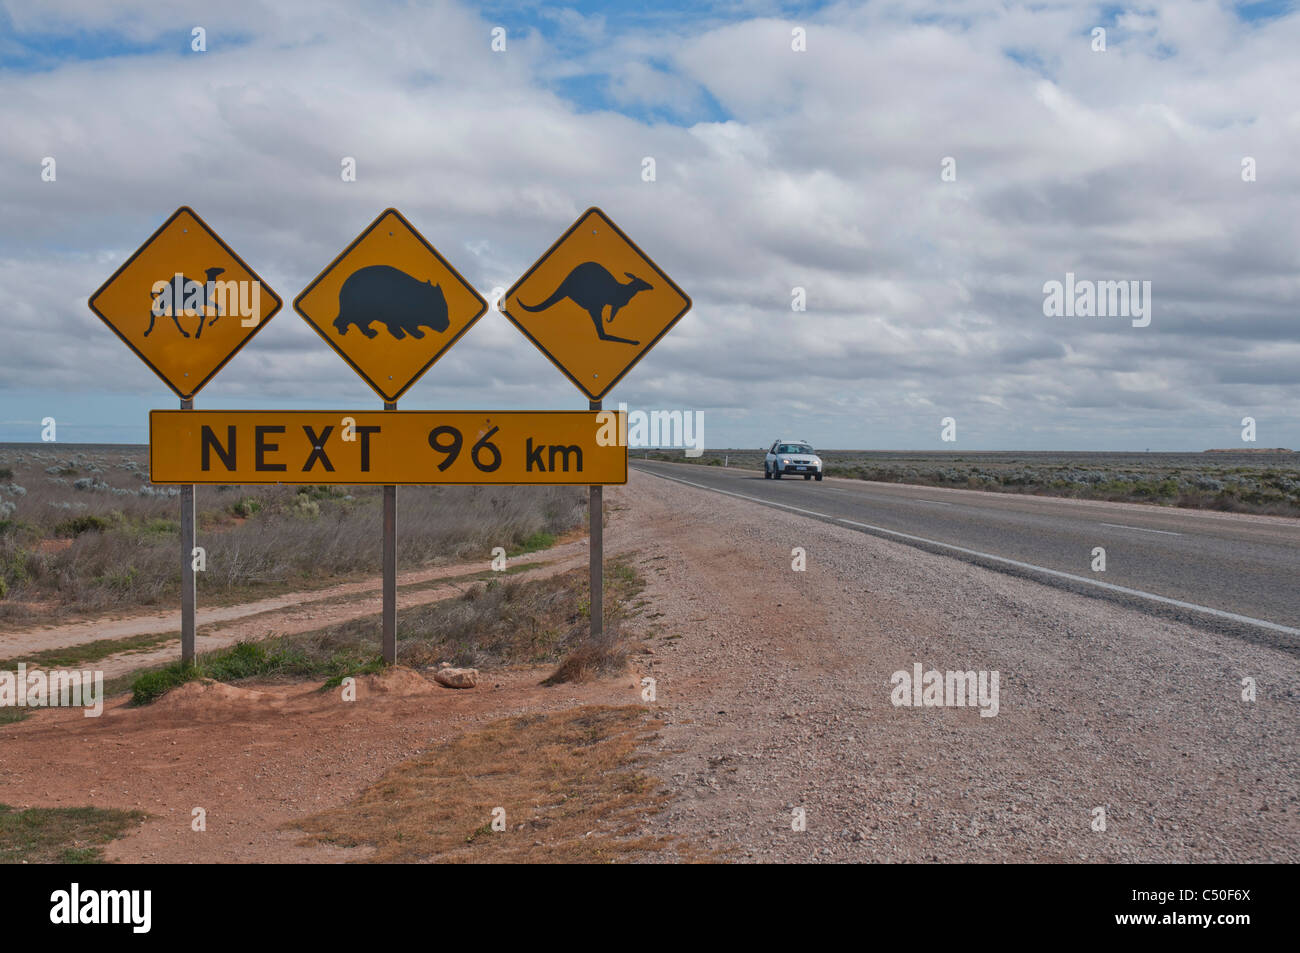 Road signs on the Nullarbor Plain indicating the presence of Camels, wombat, and kangaroos on the road ahead Stock Photo